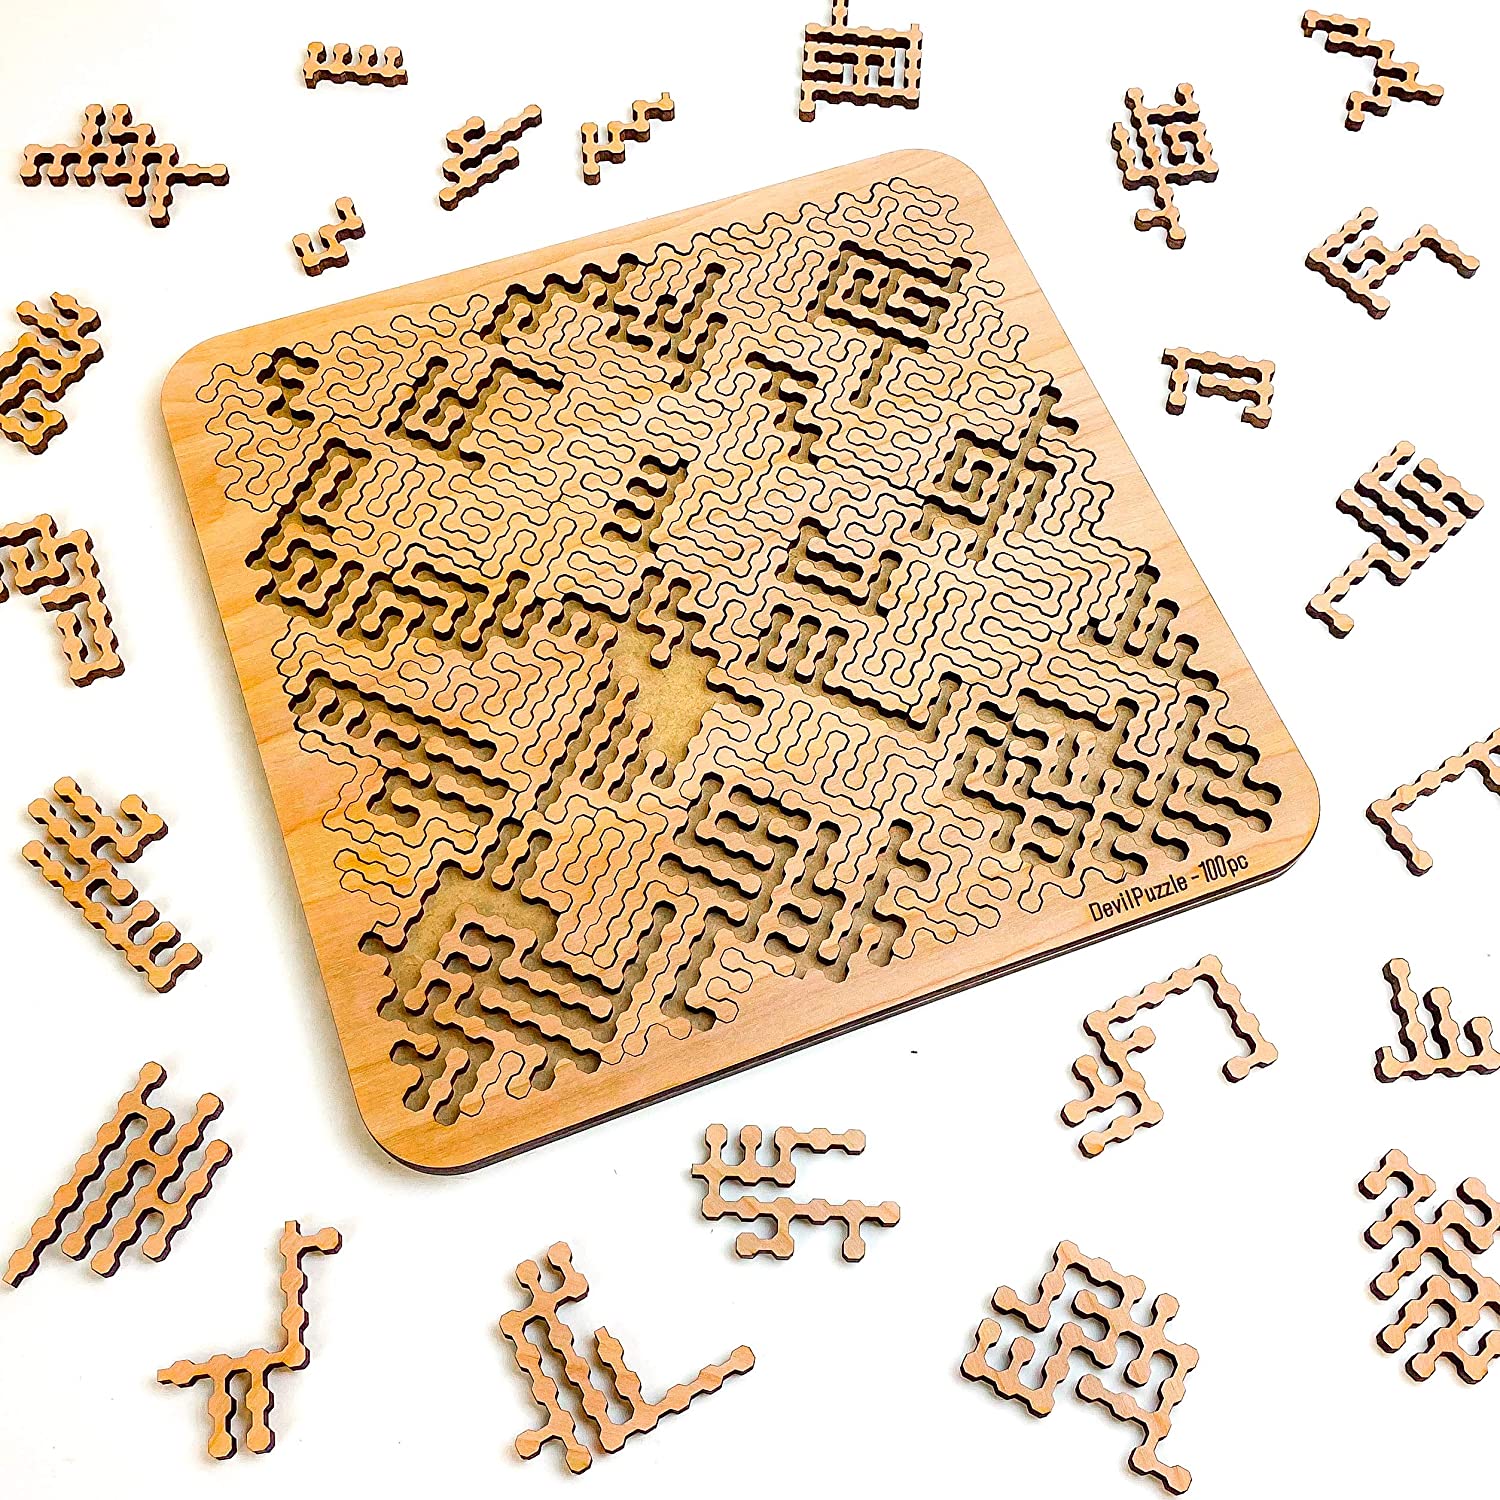 mind bending wooden jigsaw puzzle on a white background